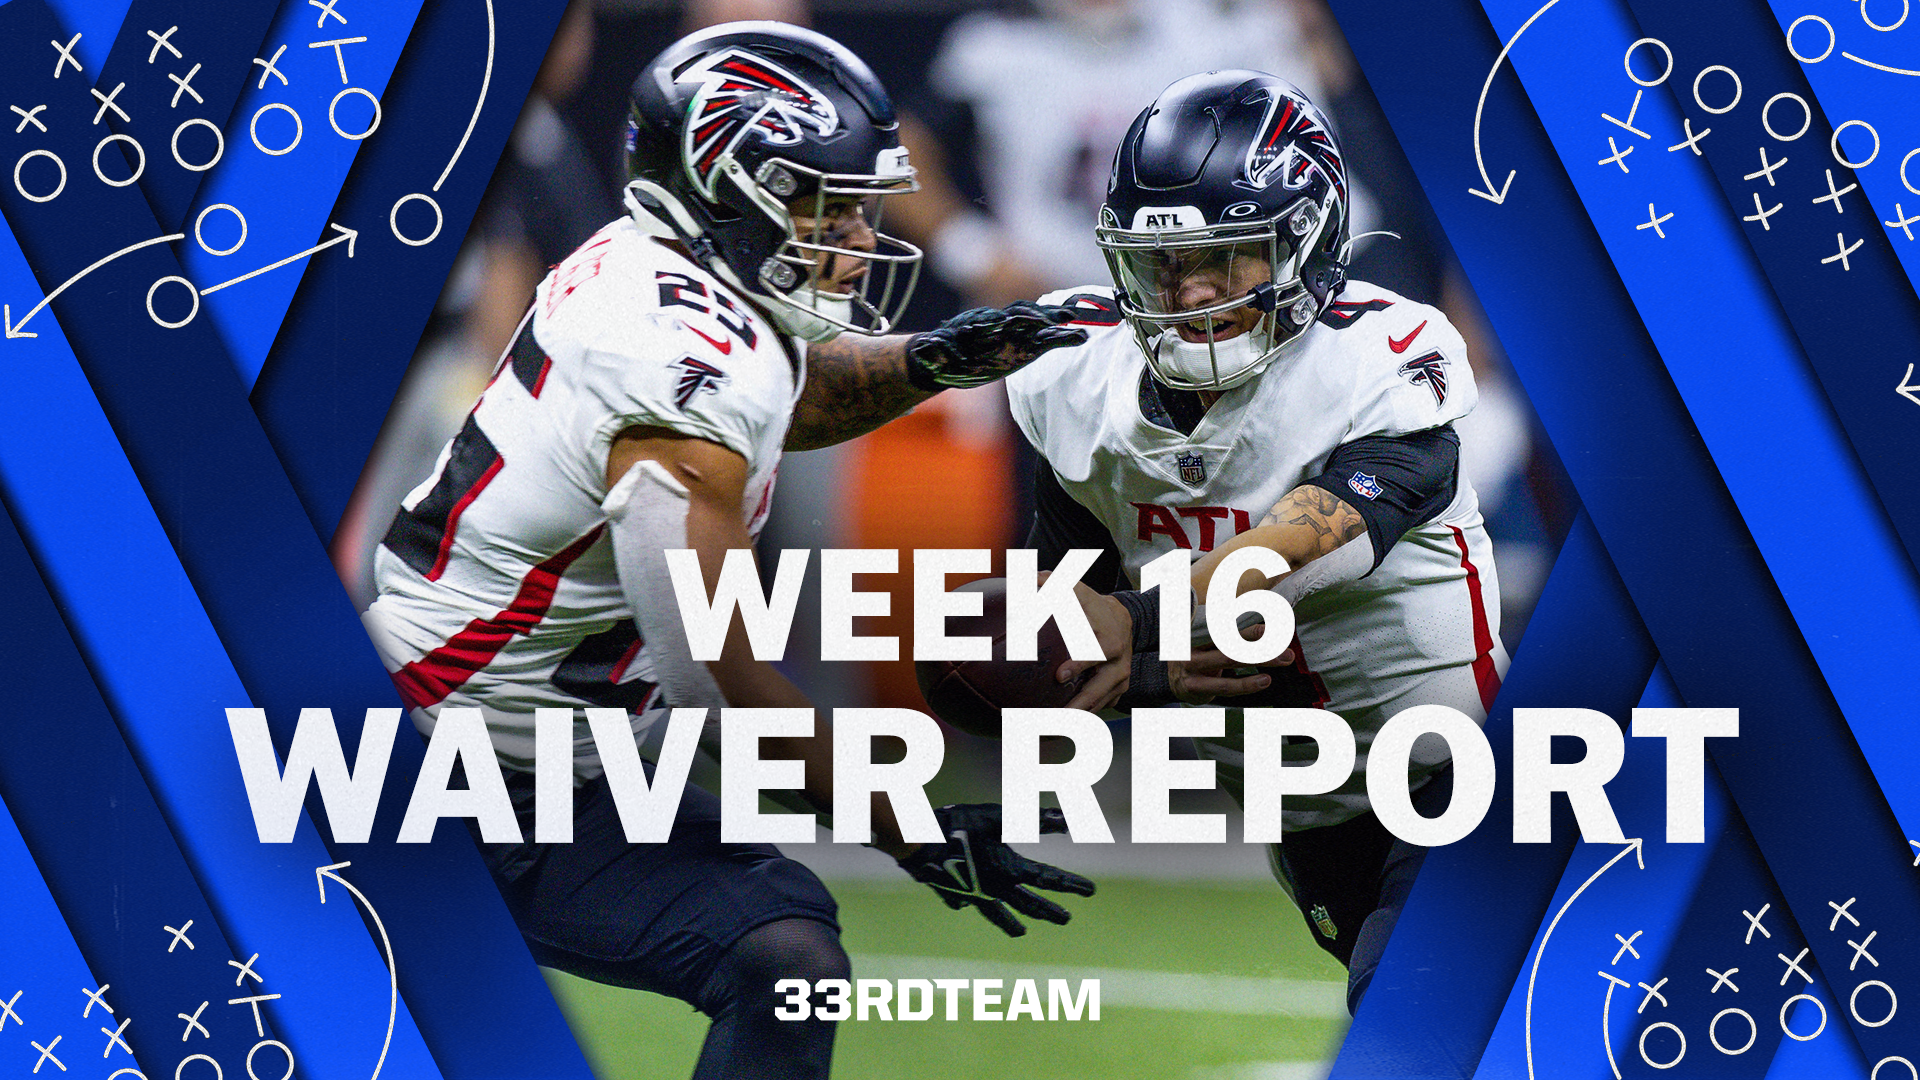 Fantasy Football: Week 16 Waiver Wire Adds, Drops and More